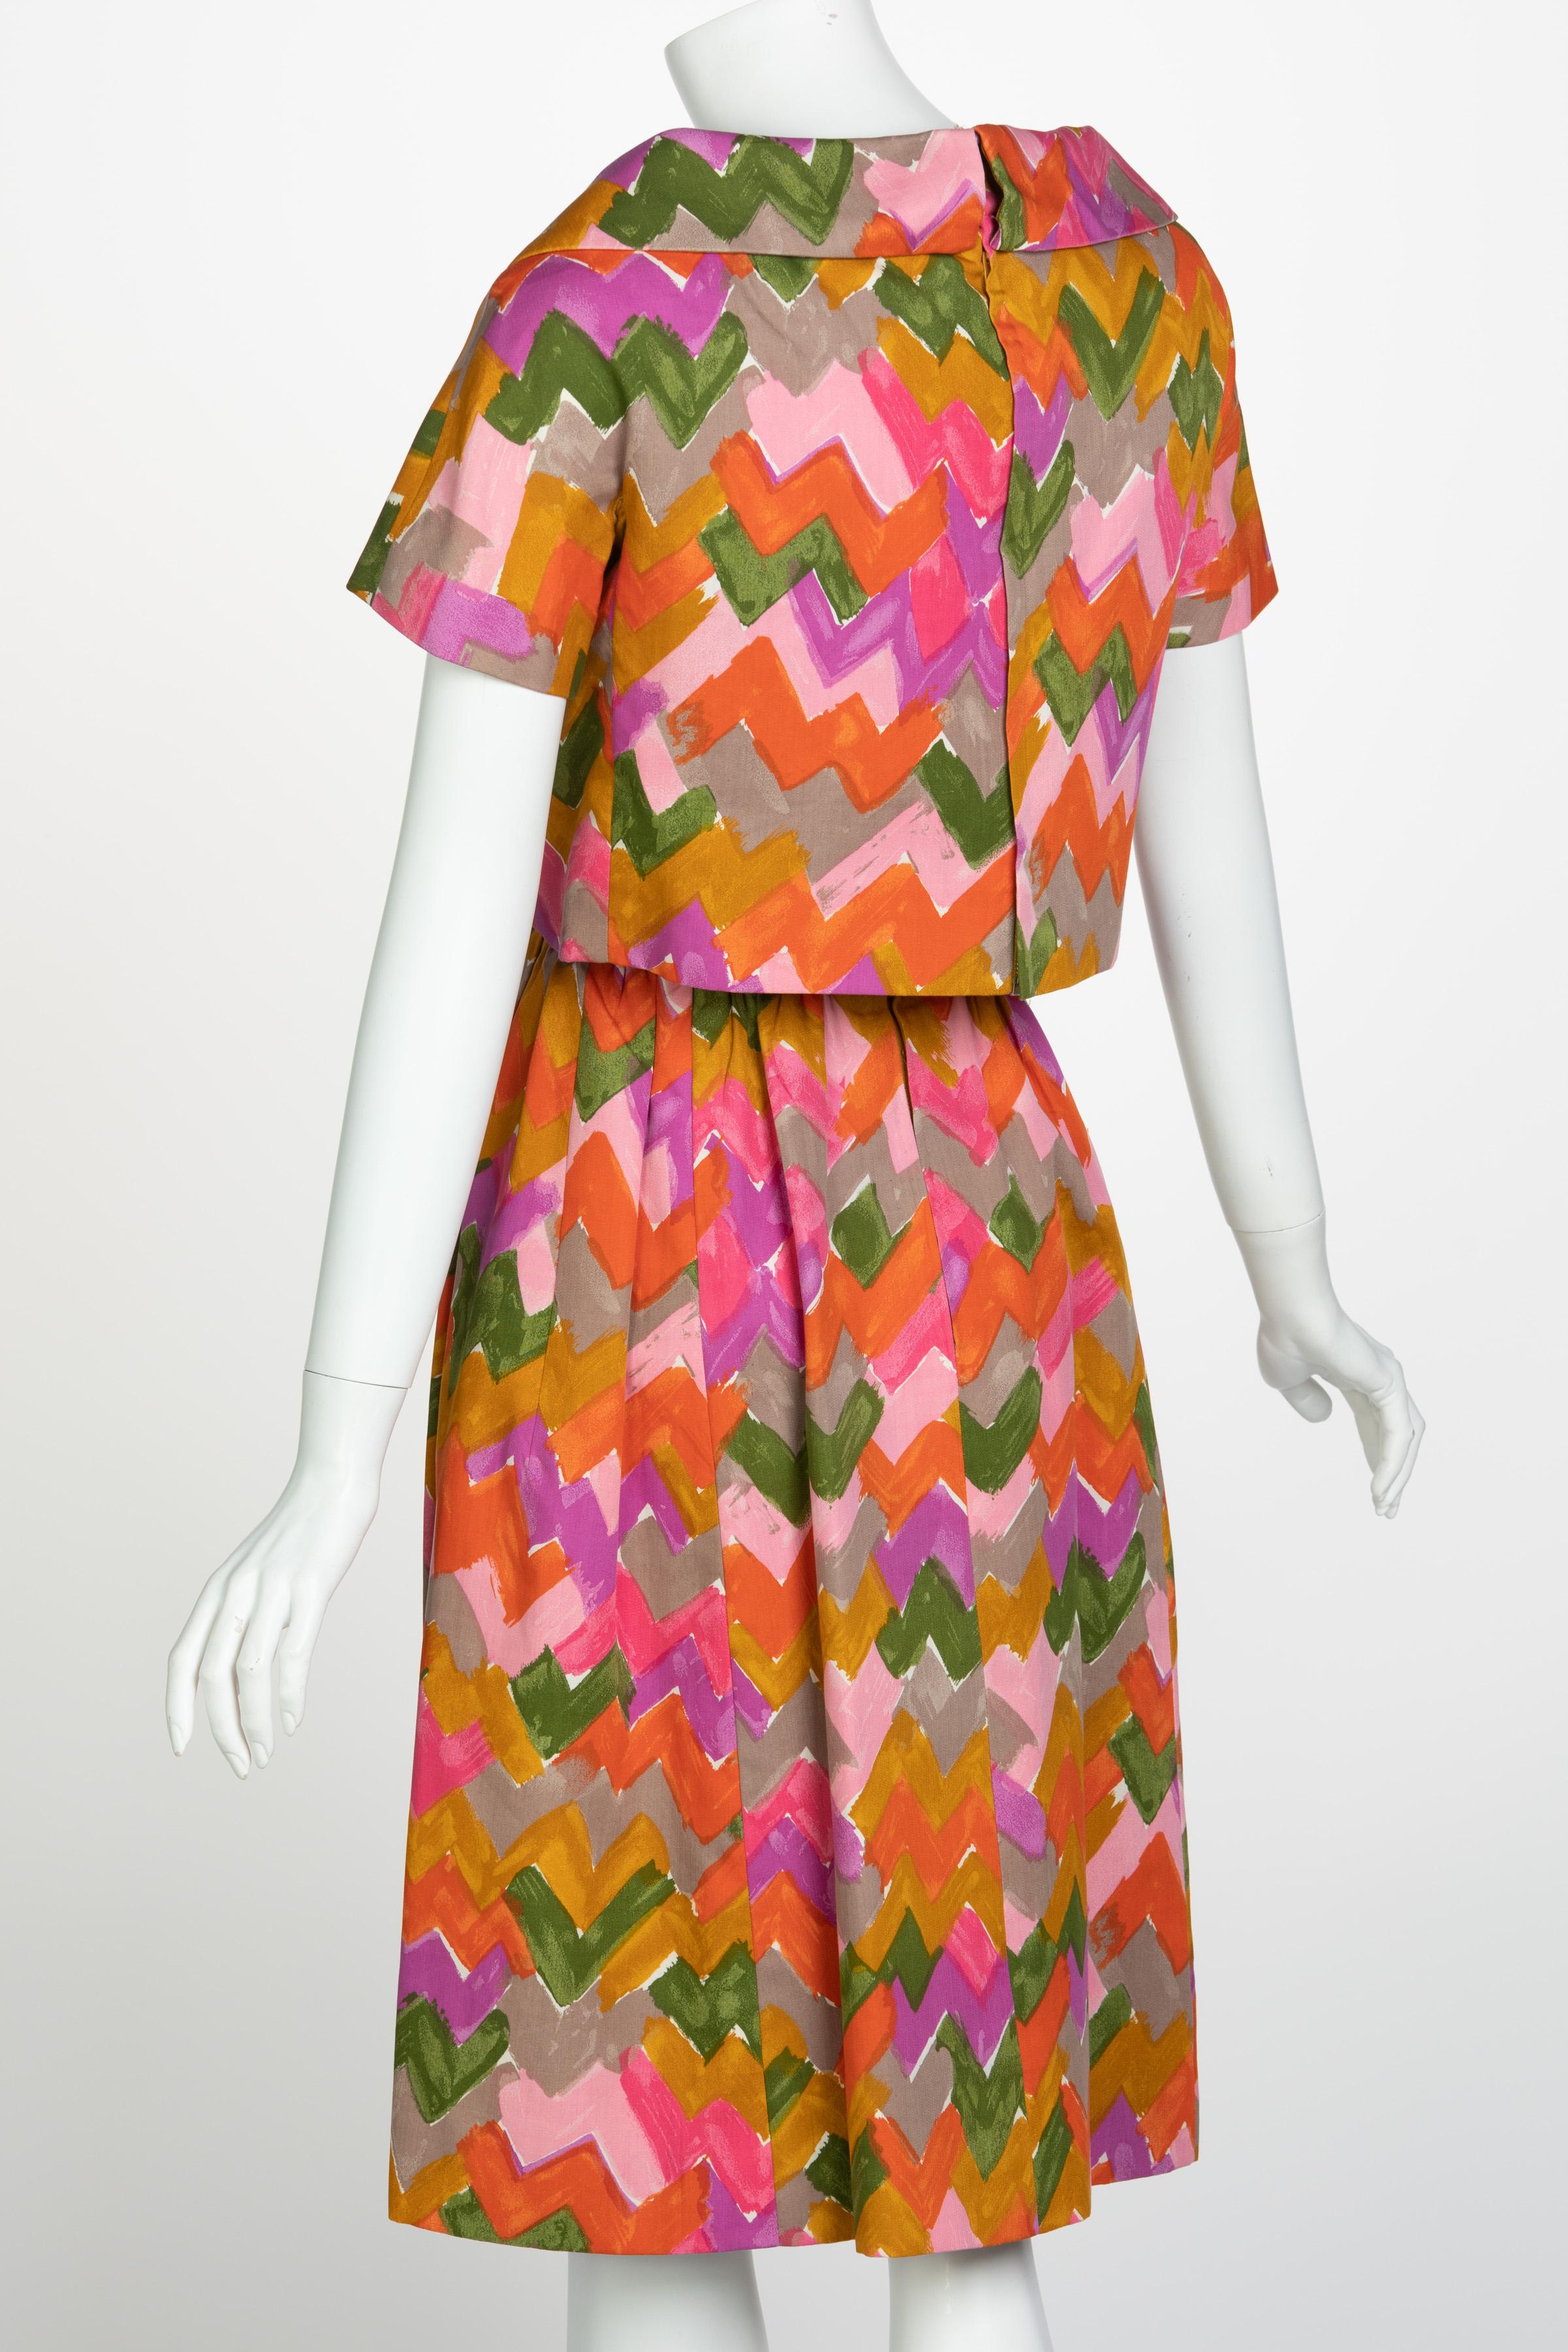 Women's or Men's Christian Dior Demi-Couture Colorful Chevron Tailored Belted Dress, 1950s